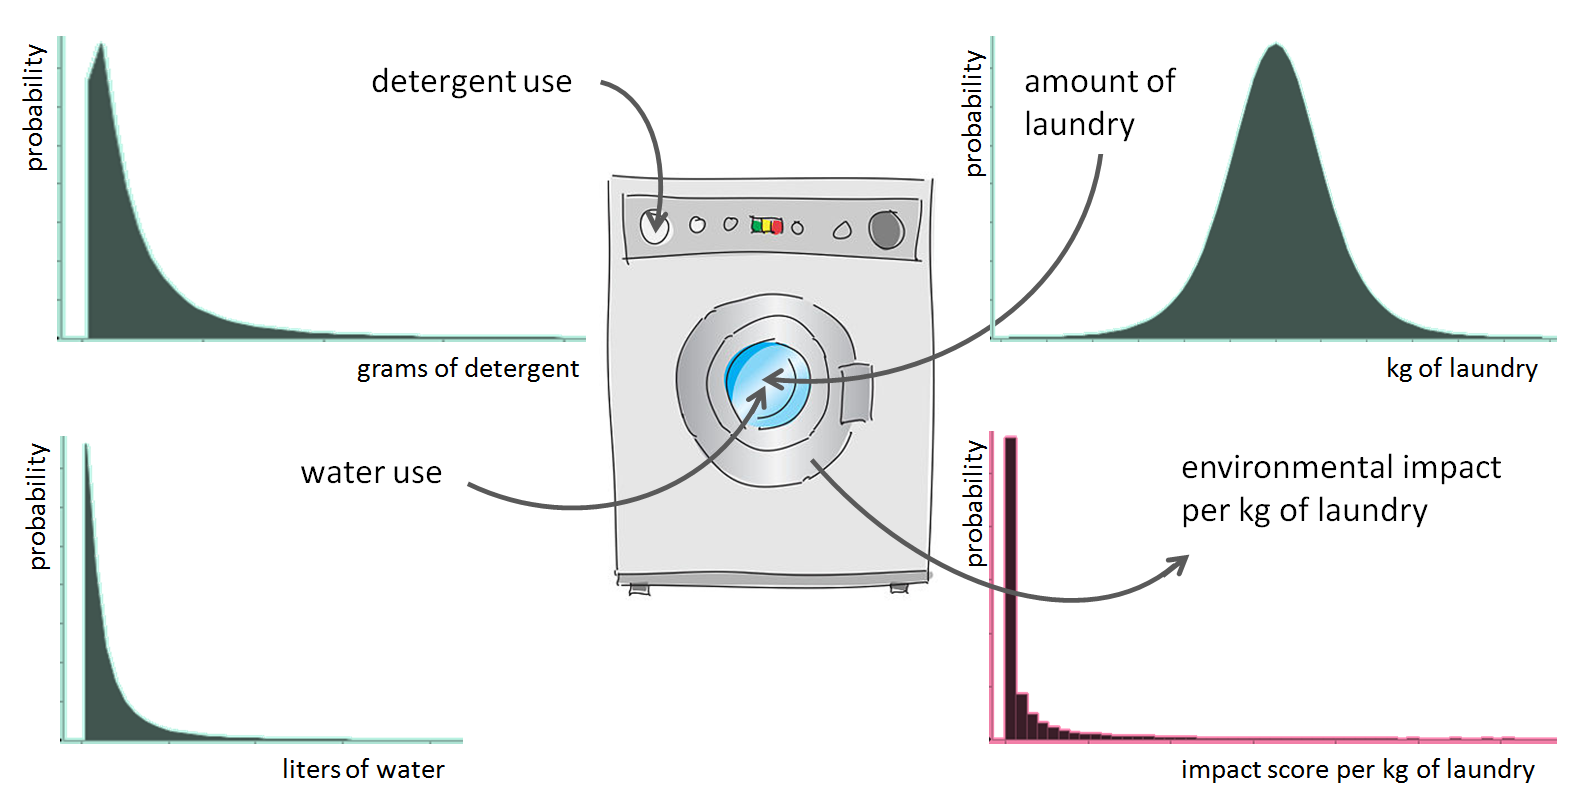 The uncertainty distributions of the inventory data - An example for laundry